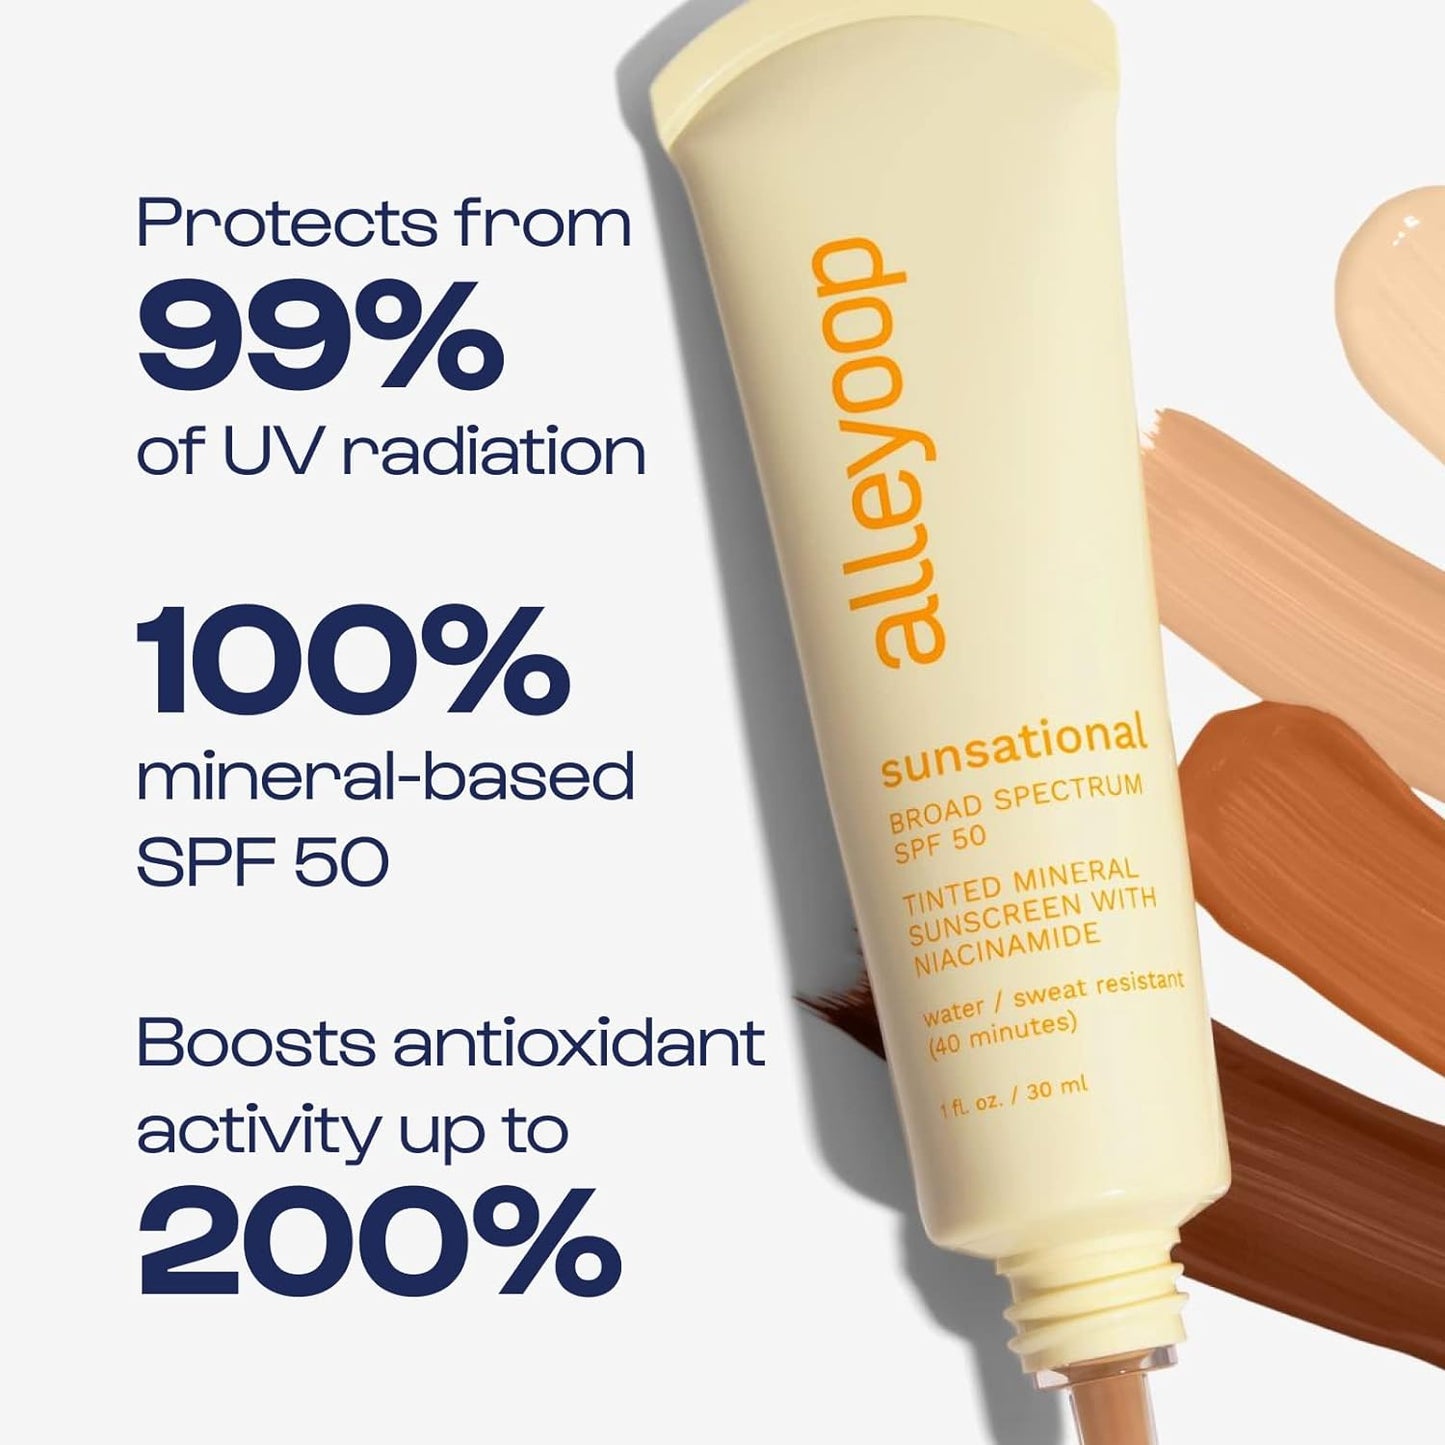 Sunsational Tinted Moisturizer Sunscreen for Face Broad Spectrum SPF 50, Tinted 100% Mineral Sunscreen with Niacinamide & Jojoba, Protects Hydrates and Soothes Skin, Vegan, Cruelty-Free - Star